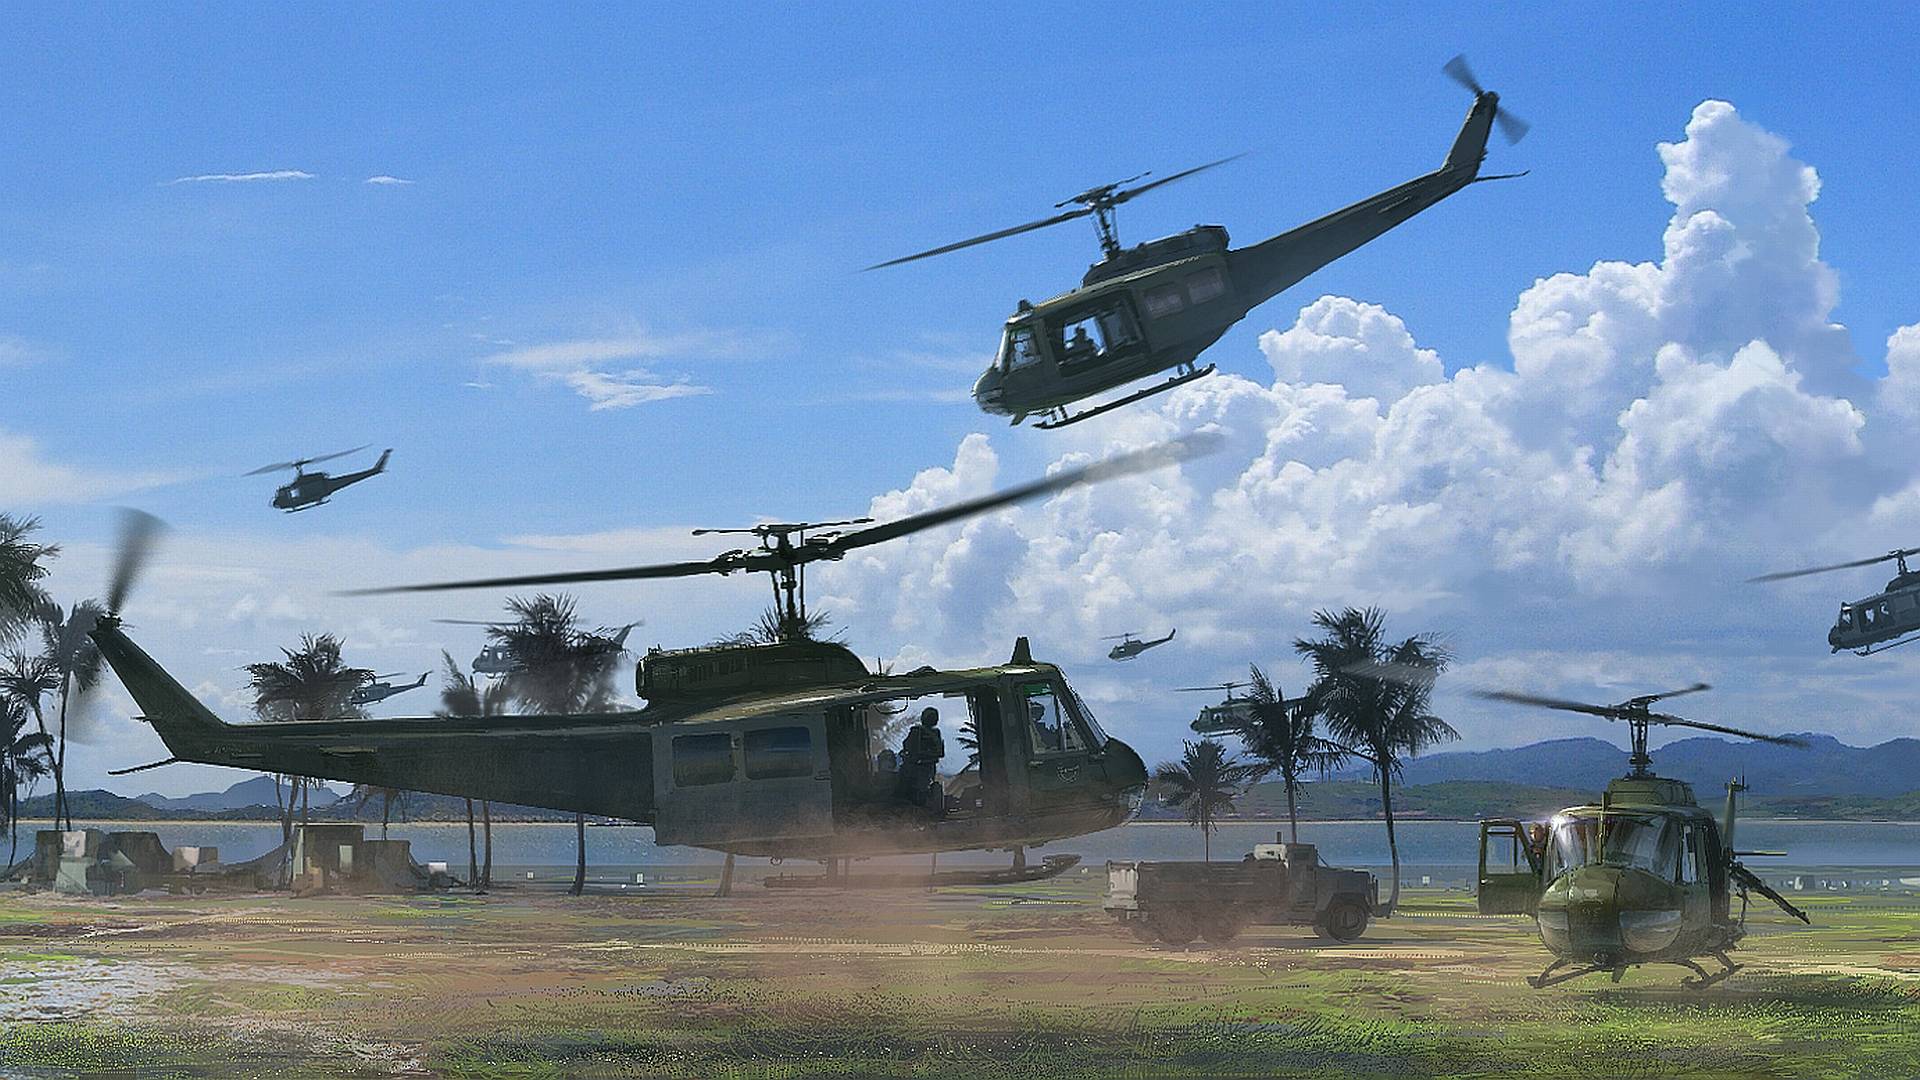 Helicopter wallpaper